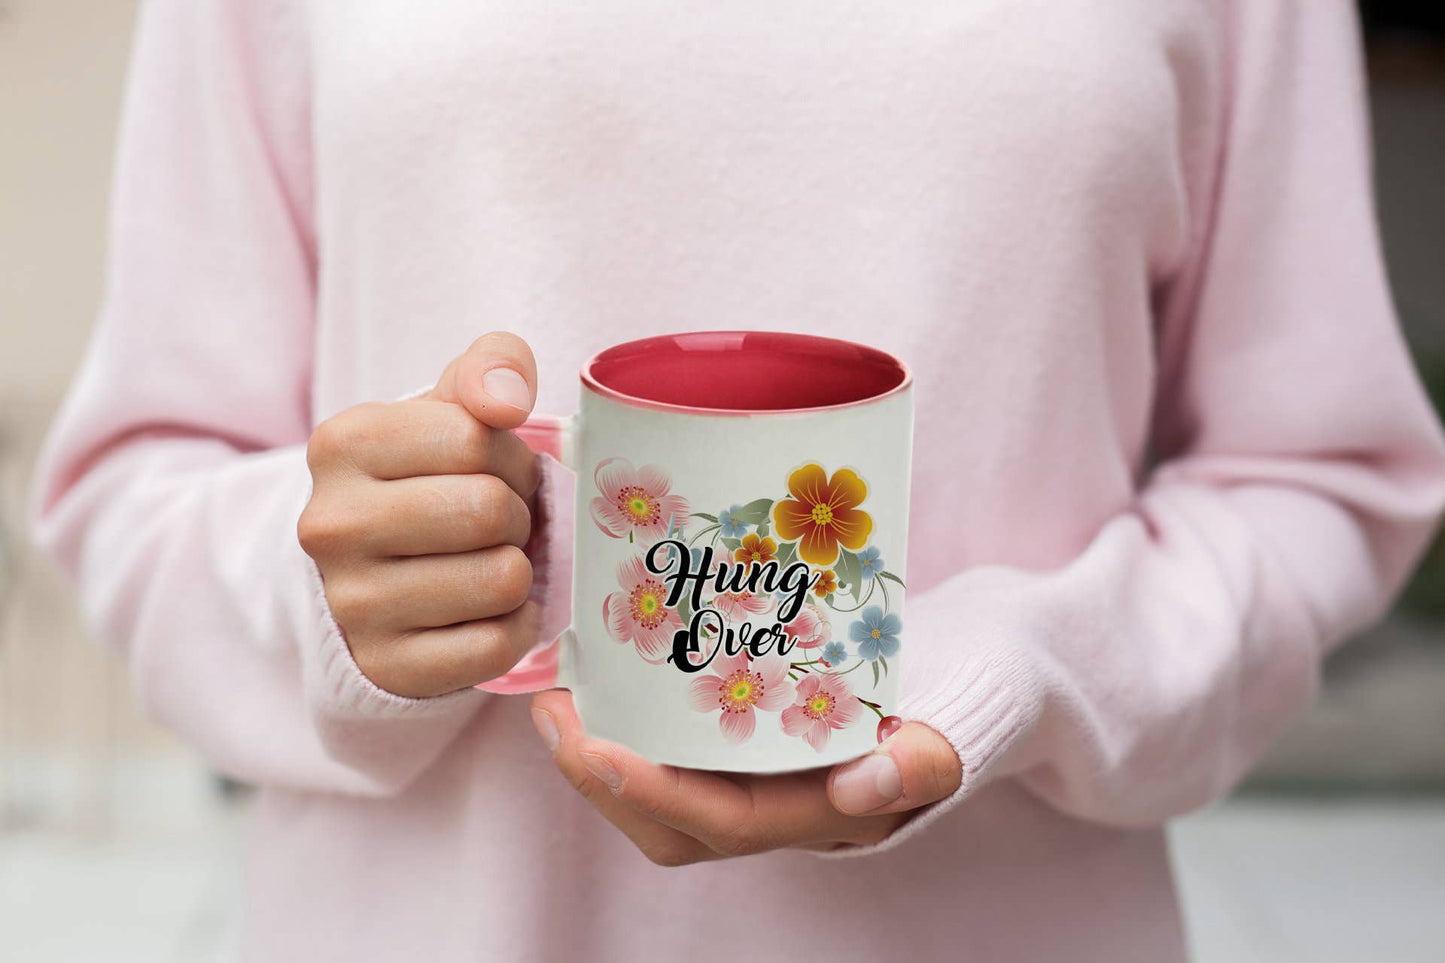 Hung Over Mug - Floral Fancy And Delicate